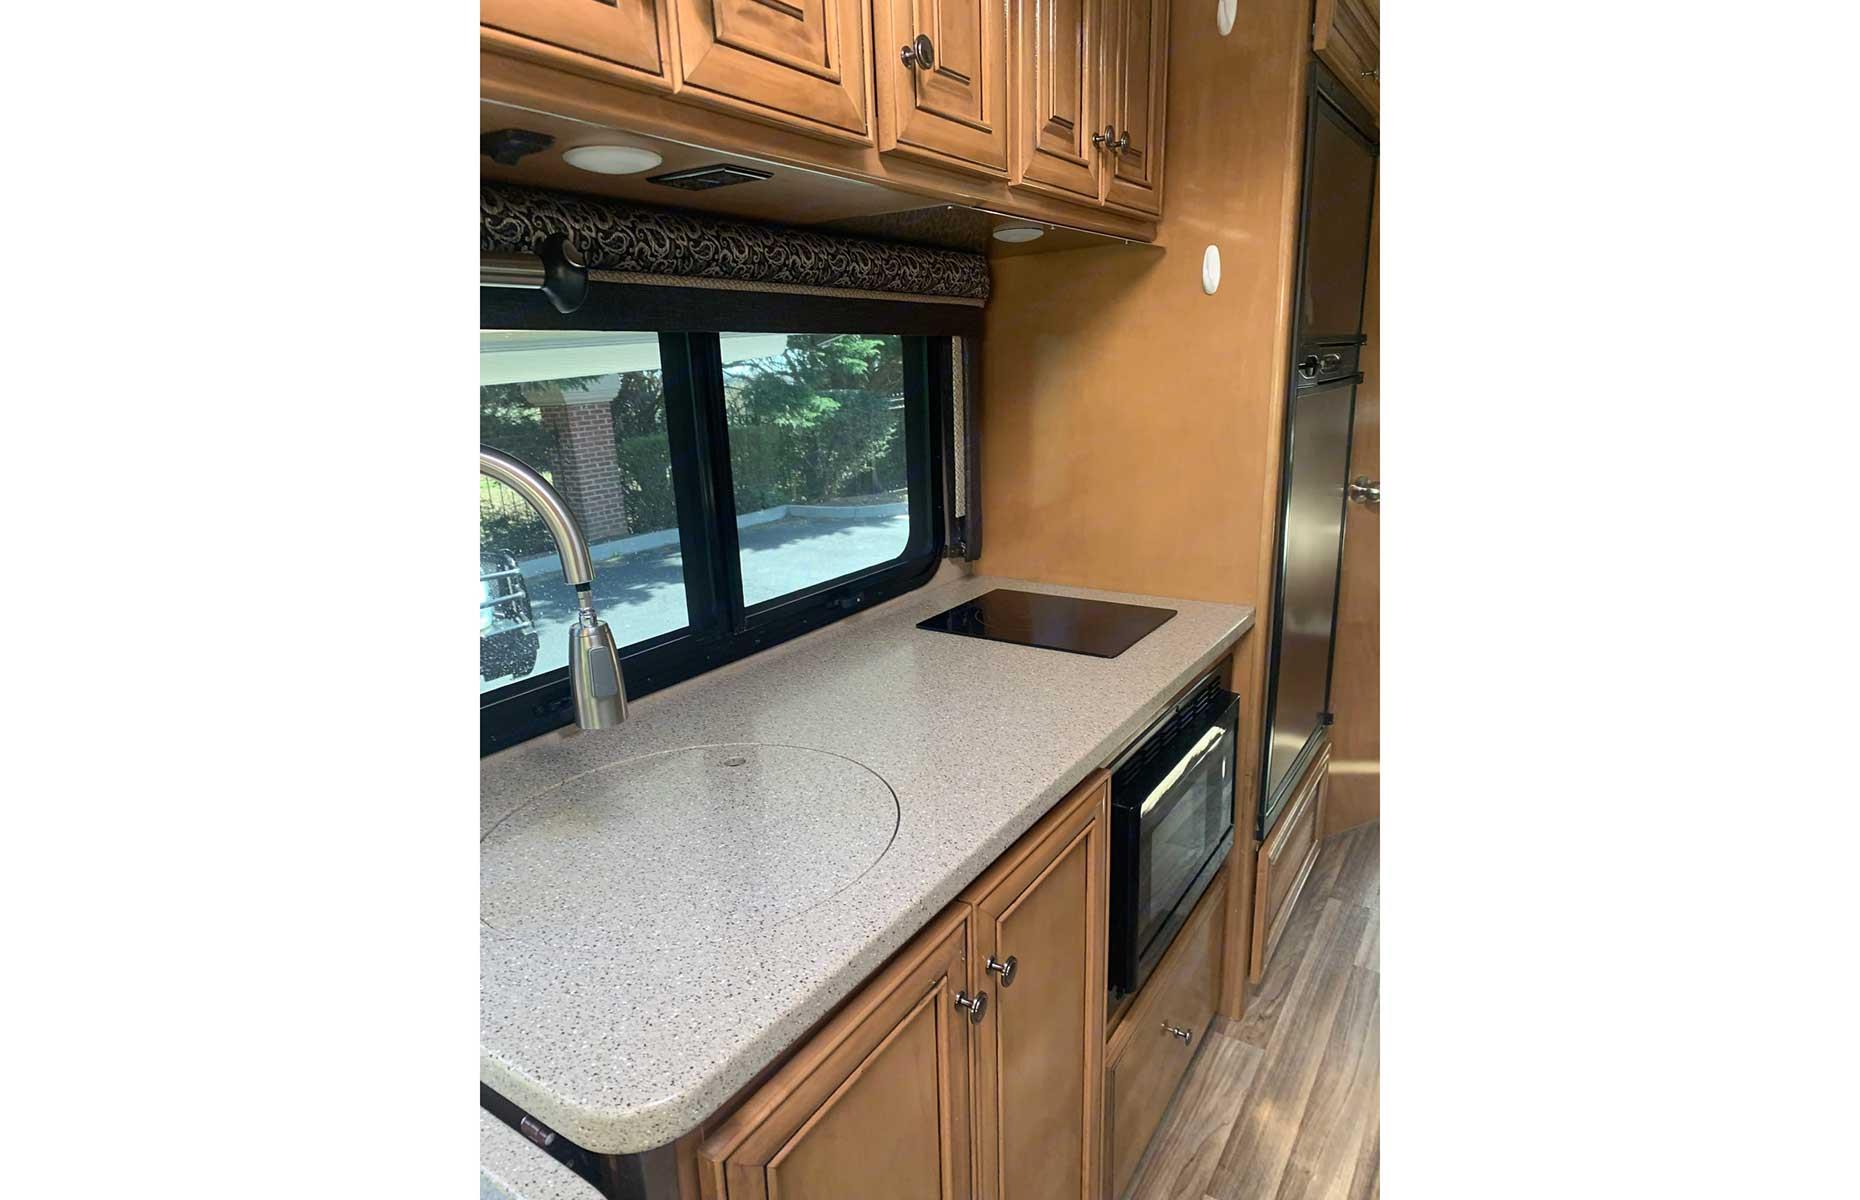 Inside includes gray, marble-like countertops and wooden cupboards with a booth-like dinette and TV. The kitchen includes a sink, induction stove, microwave and refrigerator/freezer. There’s a cabin above the driver’s seat which sleeps two and a queen size bed at the rear of the vehicle, where one of the TVs is located. Fresh linen and blankets are included in the price.